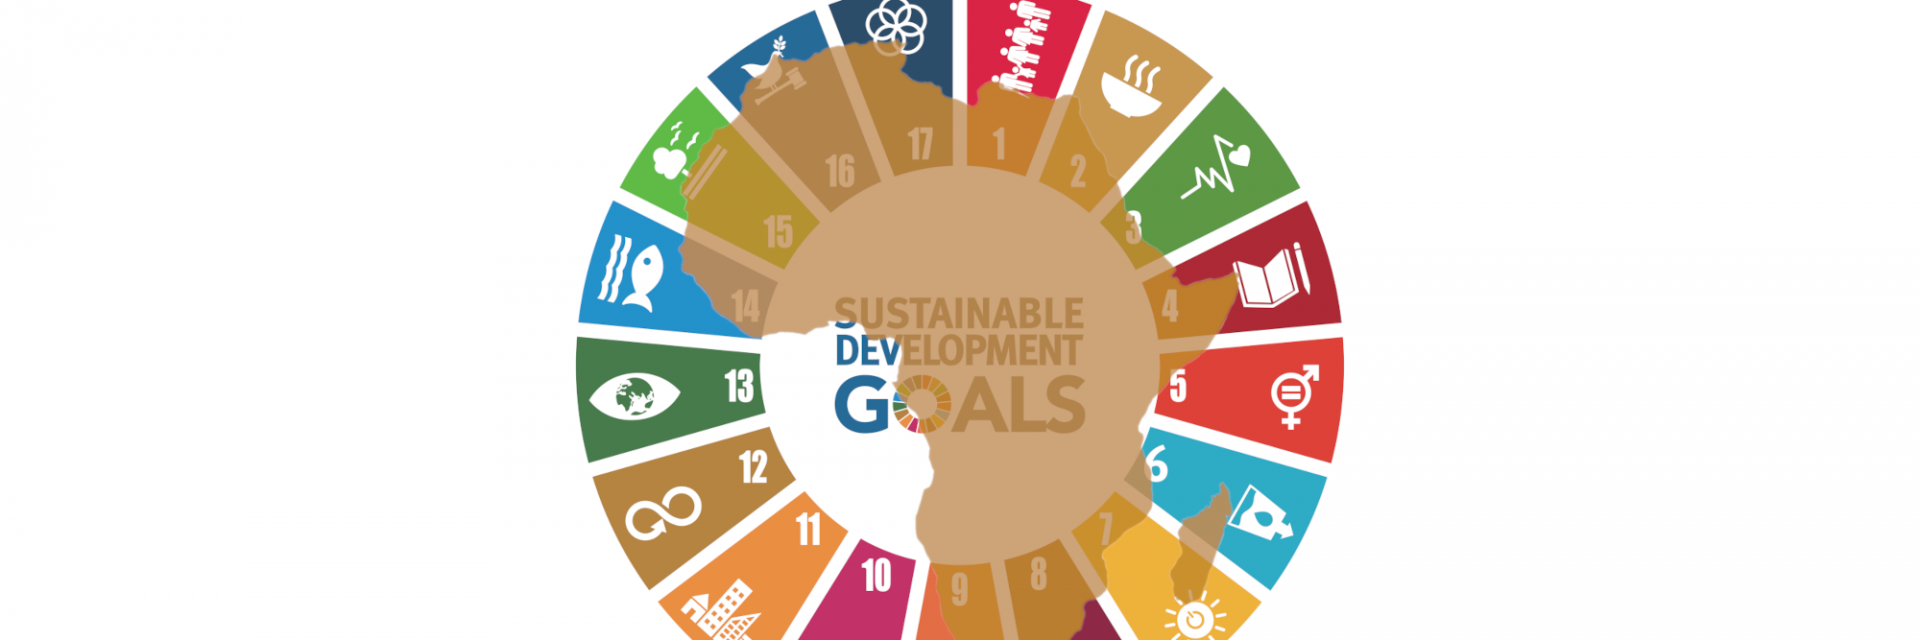 Experts call for renewed focus on sustainable development goals in Africa